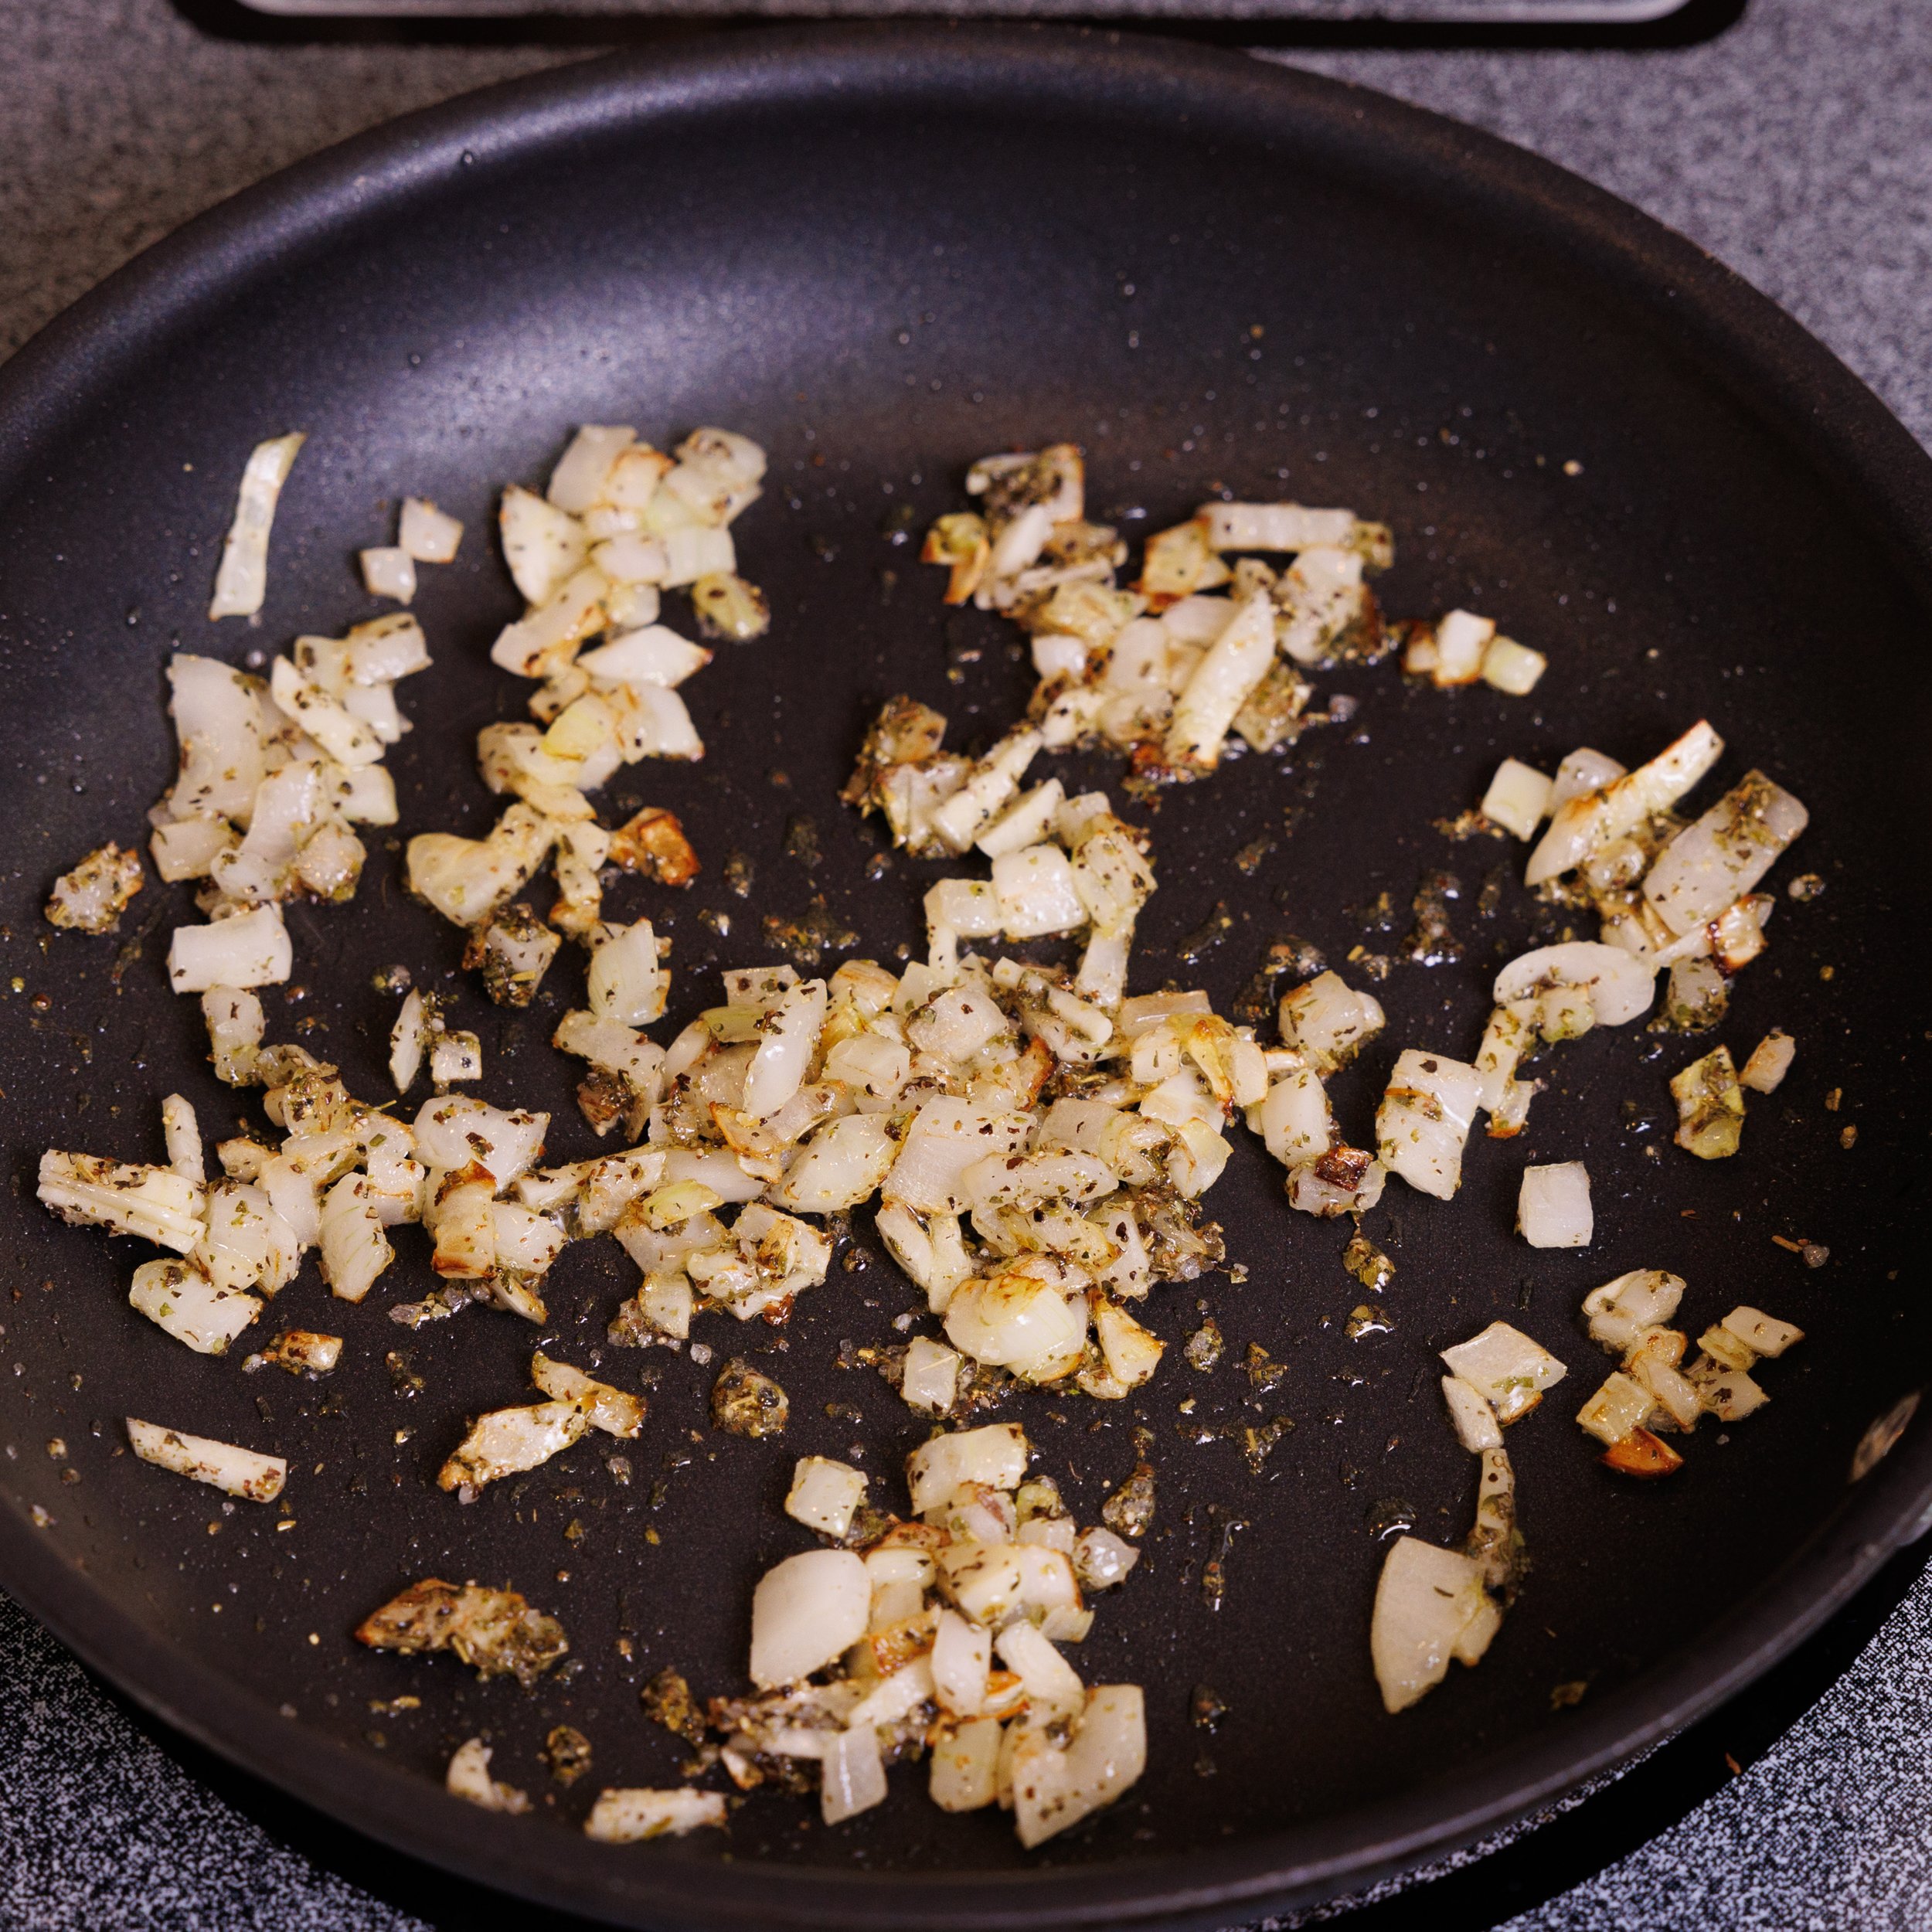 onions, garlic, and seasonings in a small frying pan on a stove.